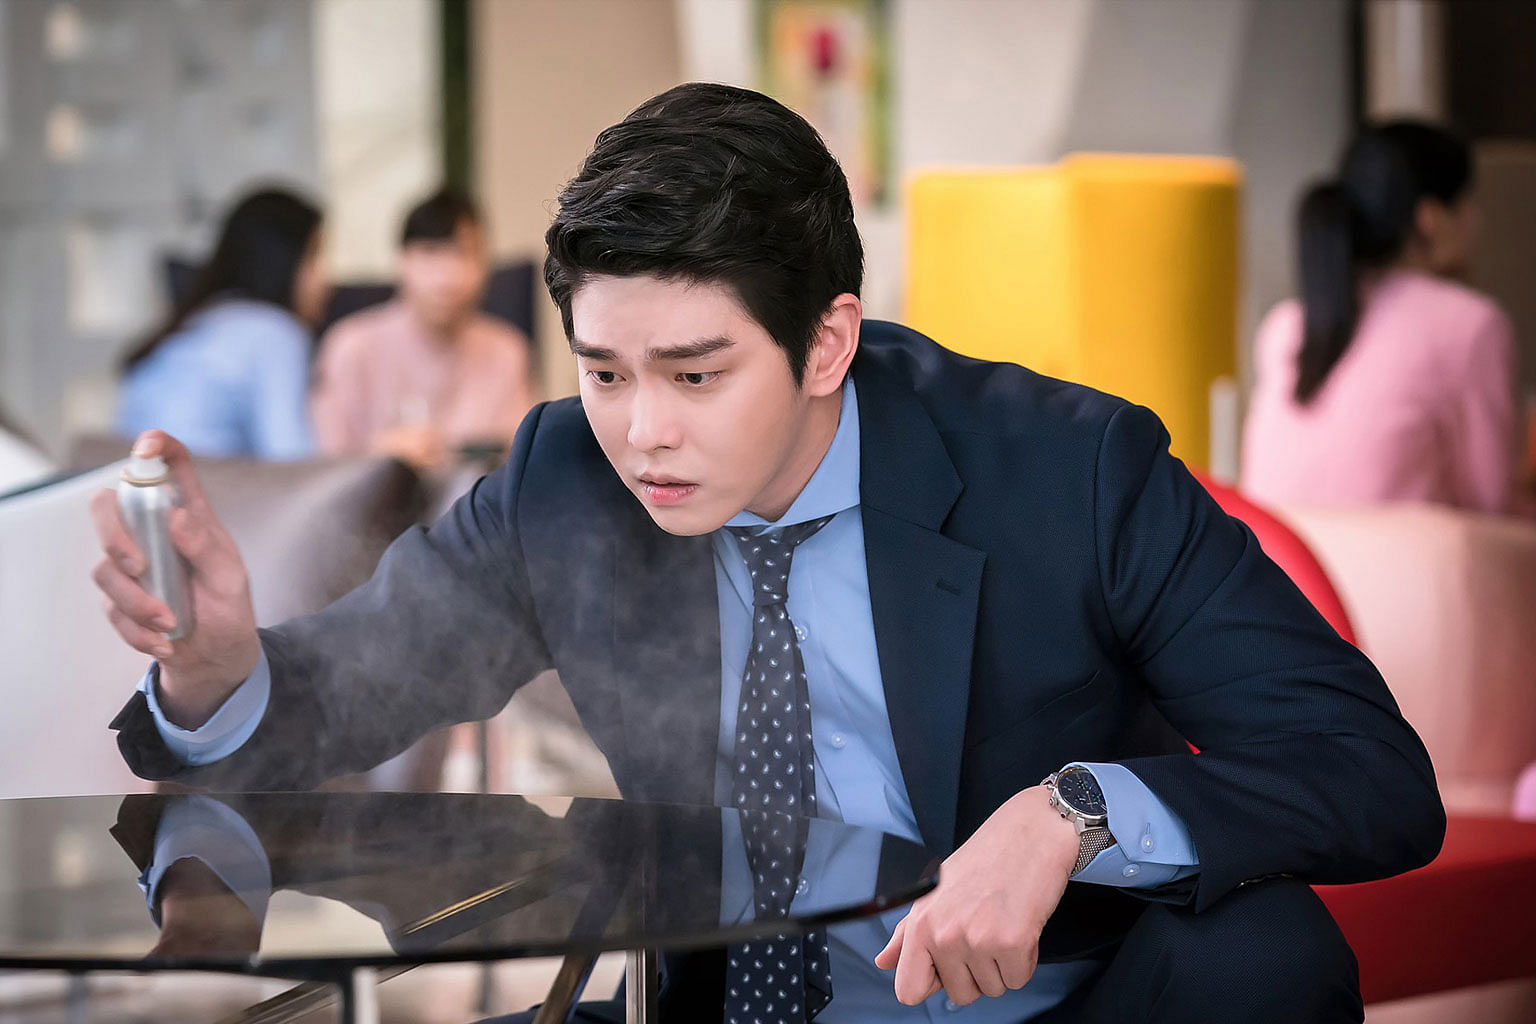 Yoon Kyun-sang (left) plays a germaphobe who runs a cleaning company in Clean With Passion For Now, while Song Hye-kyo and Park Bo-gum (above left and right) star in Encounter.